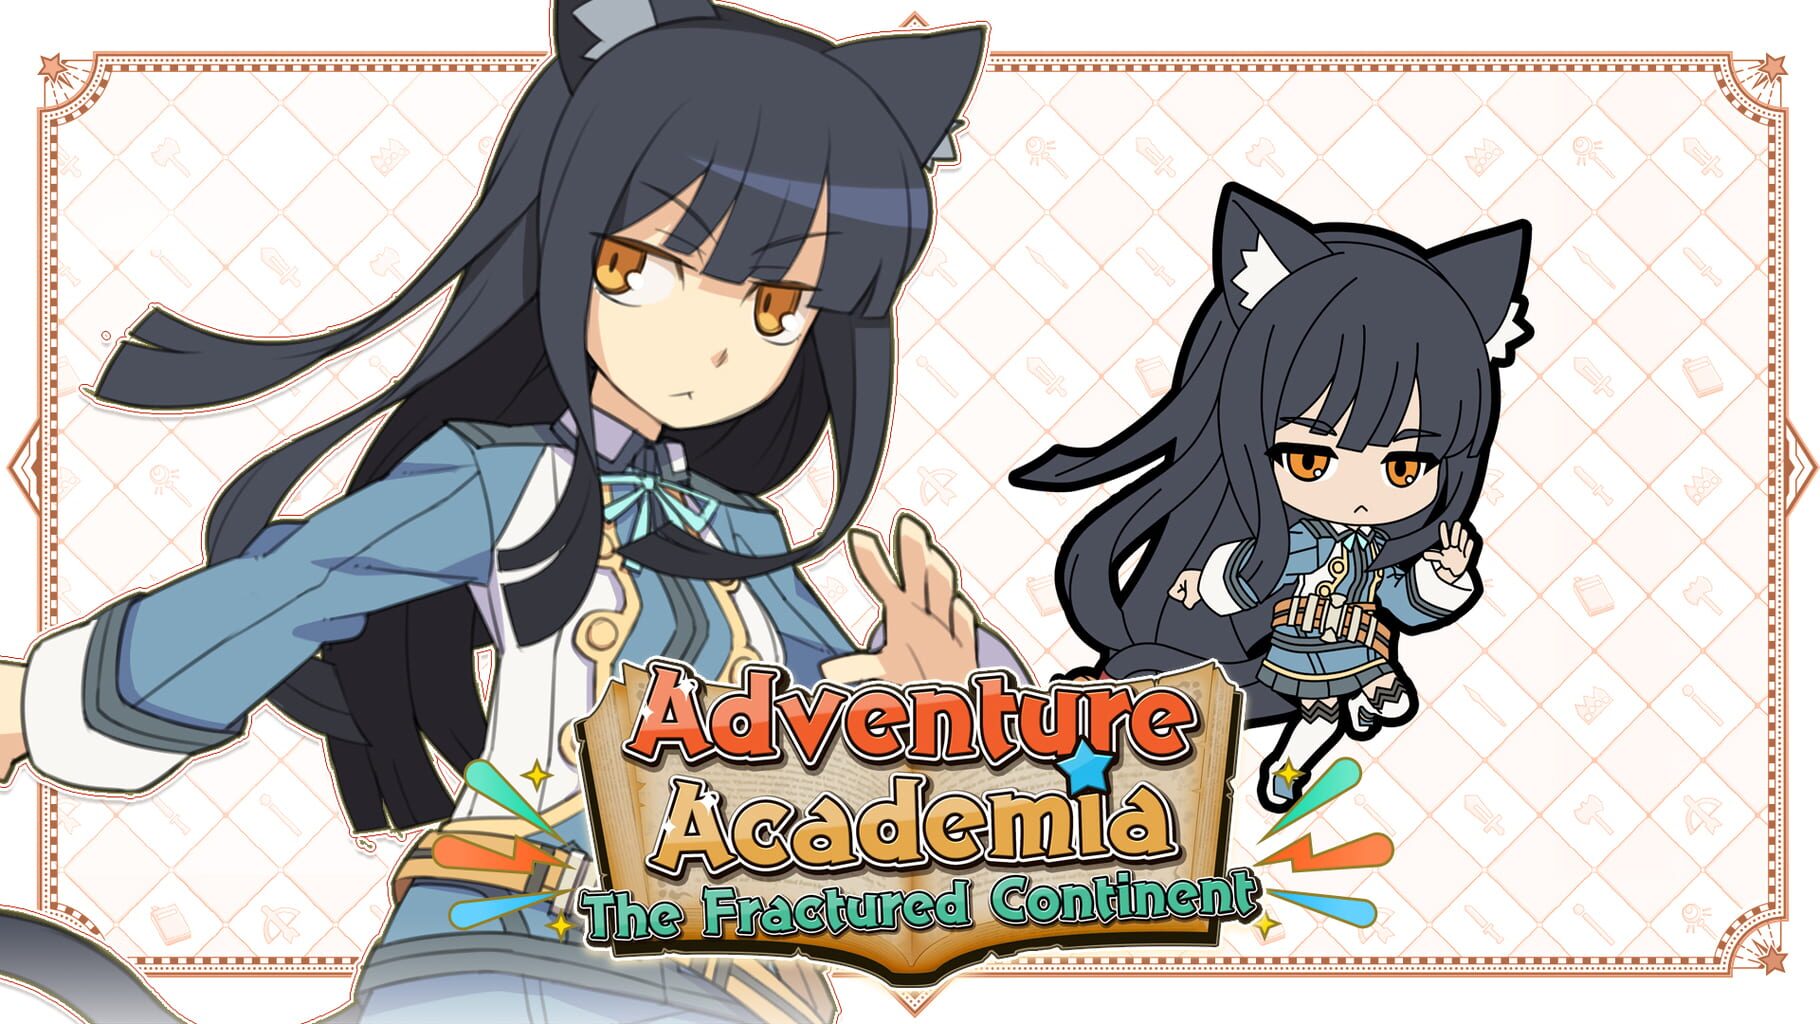 Adventure Academia: The Fractured Continent - Class of Heroes 3 Collaboration: Additional Character Felpurr artwork